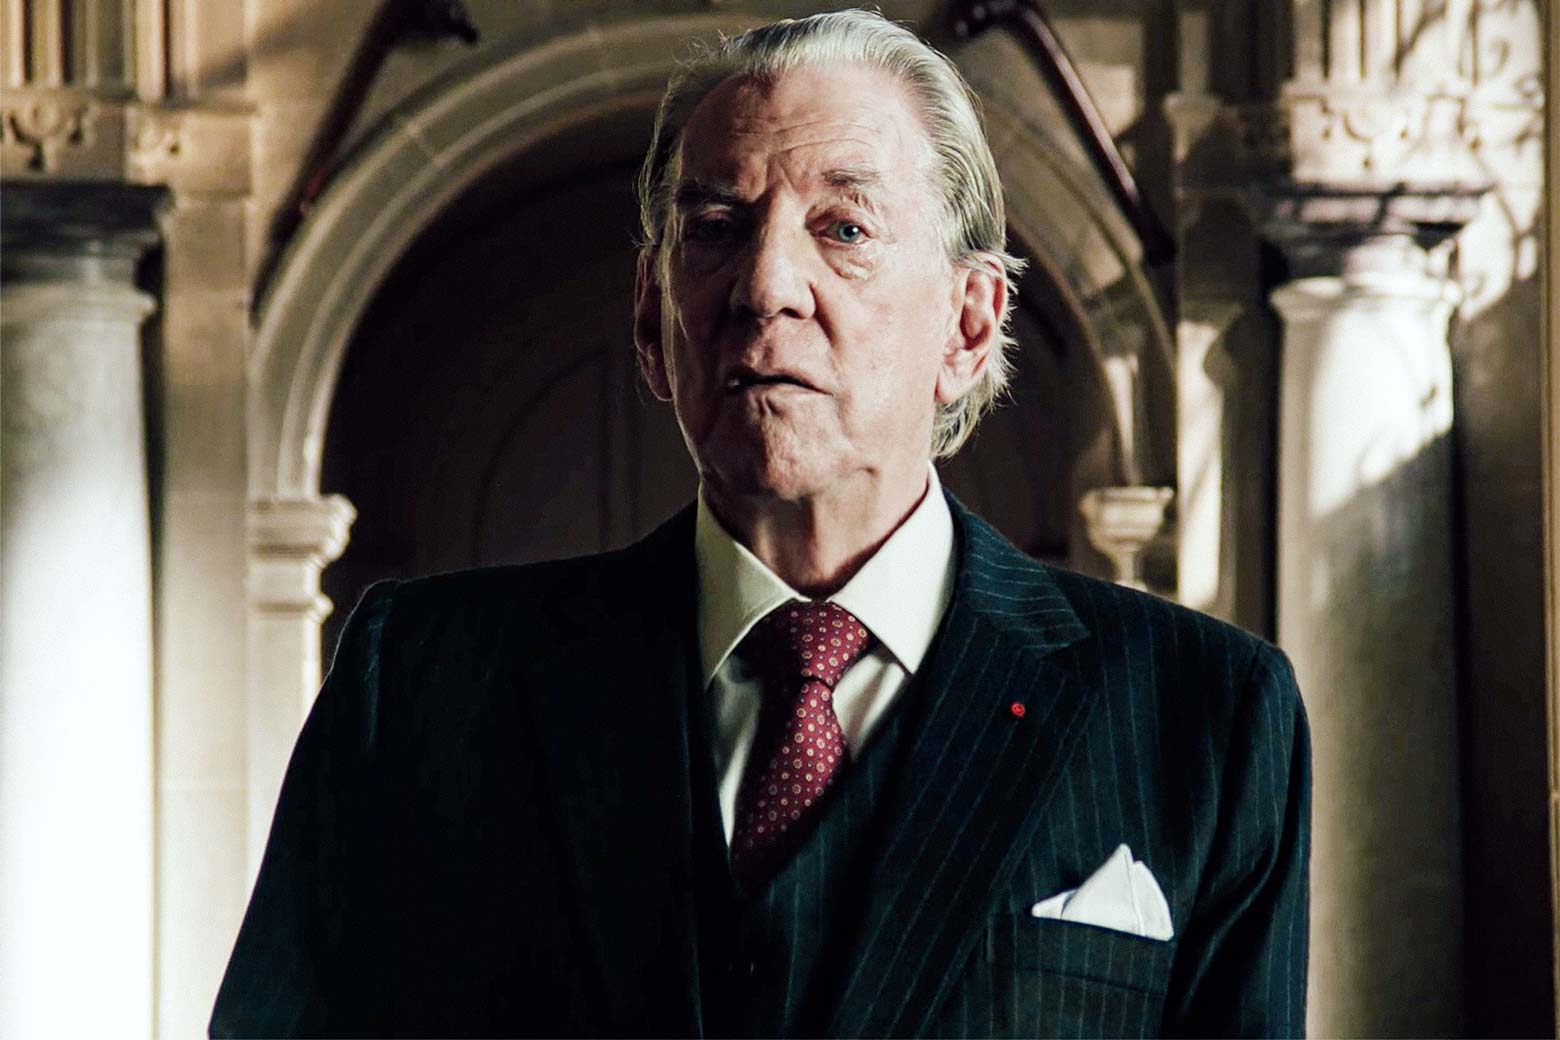 Donald Sutherland as J. Paul Getty in Trust.